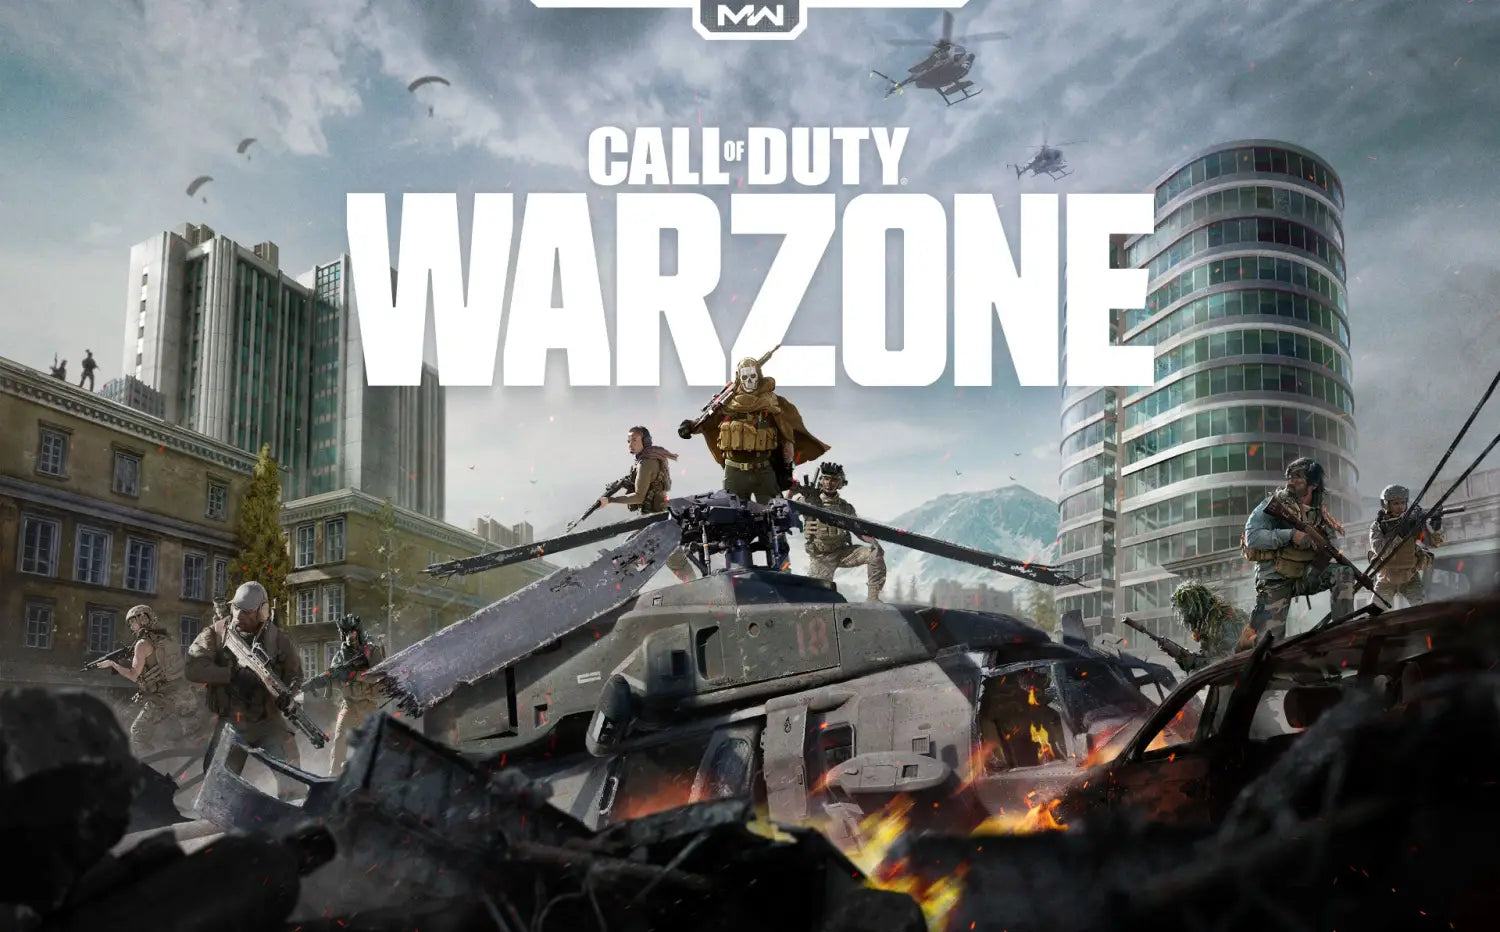 Call Of Duty: Warzone Permanent Ban Fix - How To Fix A Permanent Ban On Warzone